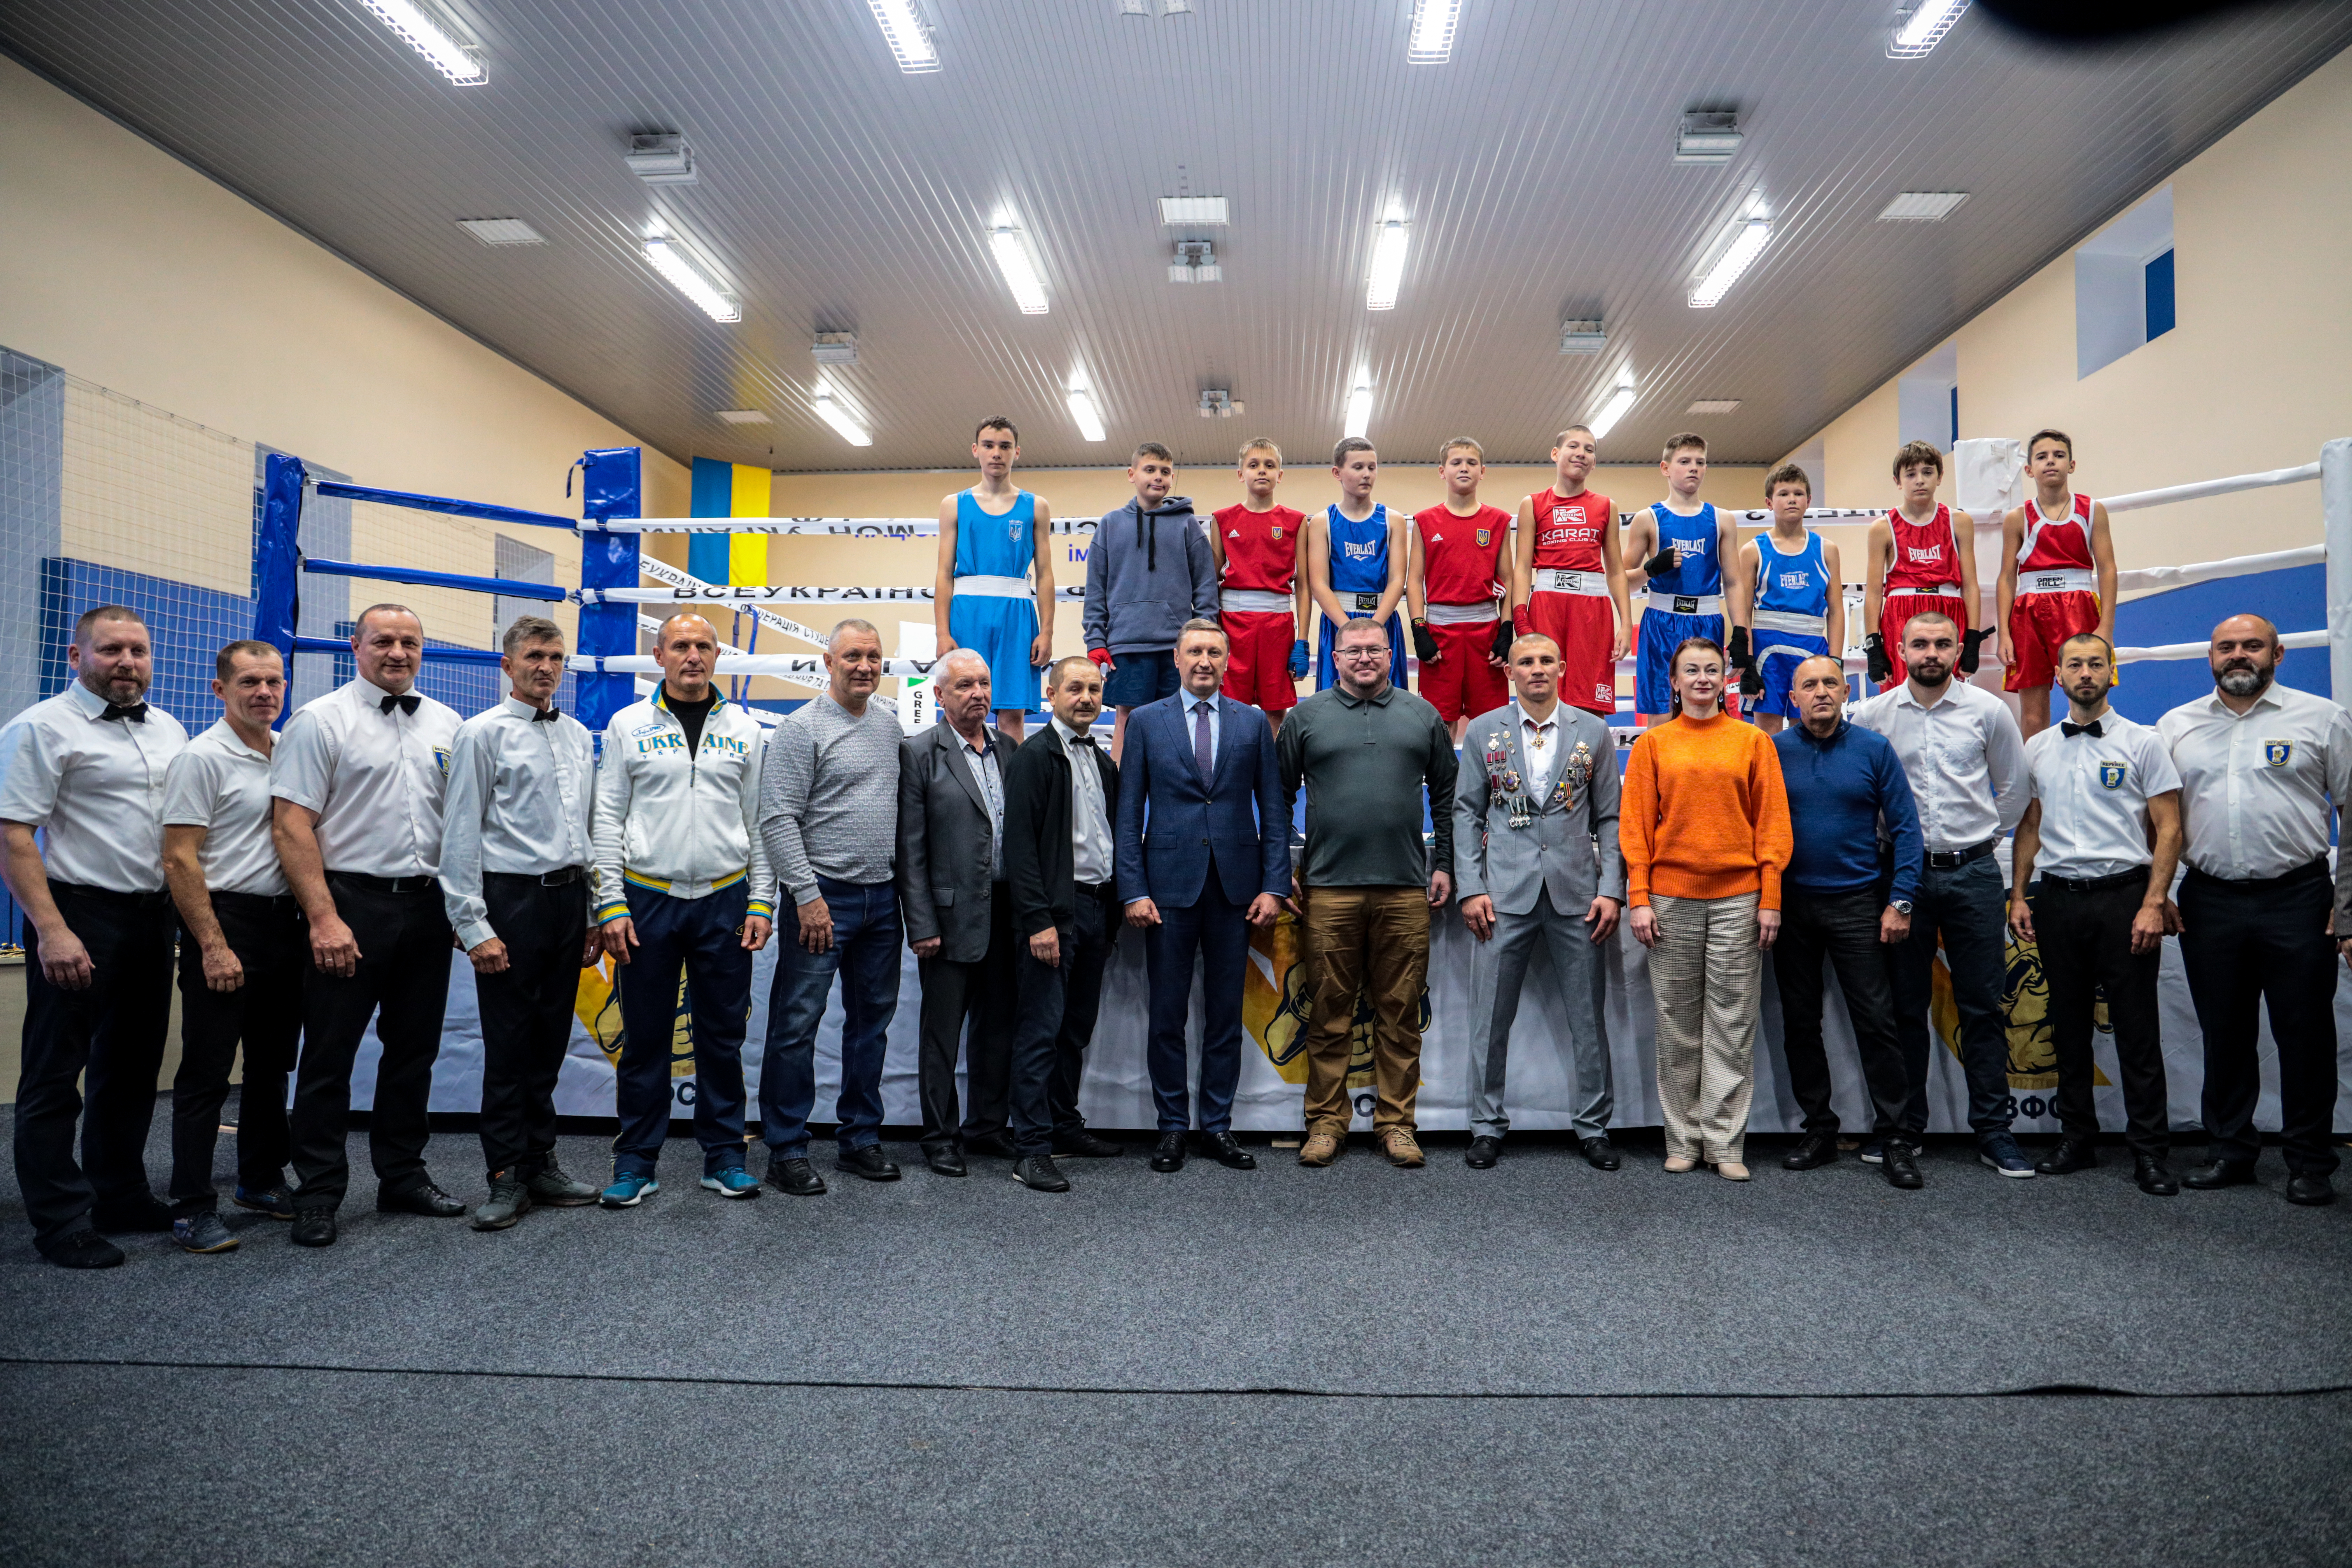 Poltava Regional Youth Boxing Championship is taking place at the Polytechnic